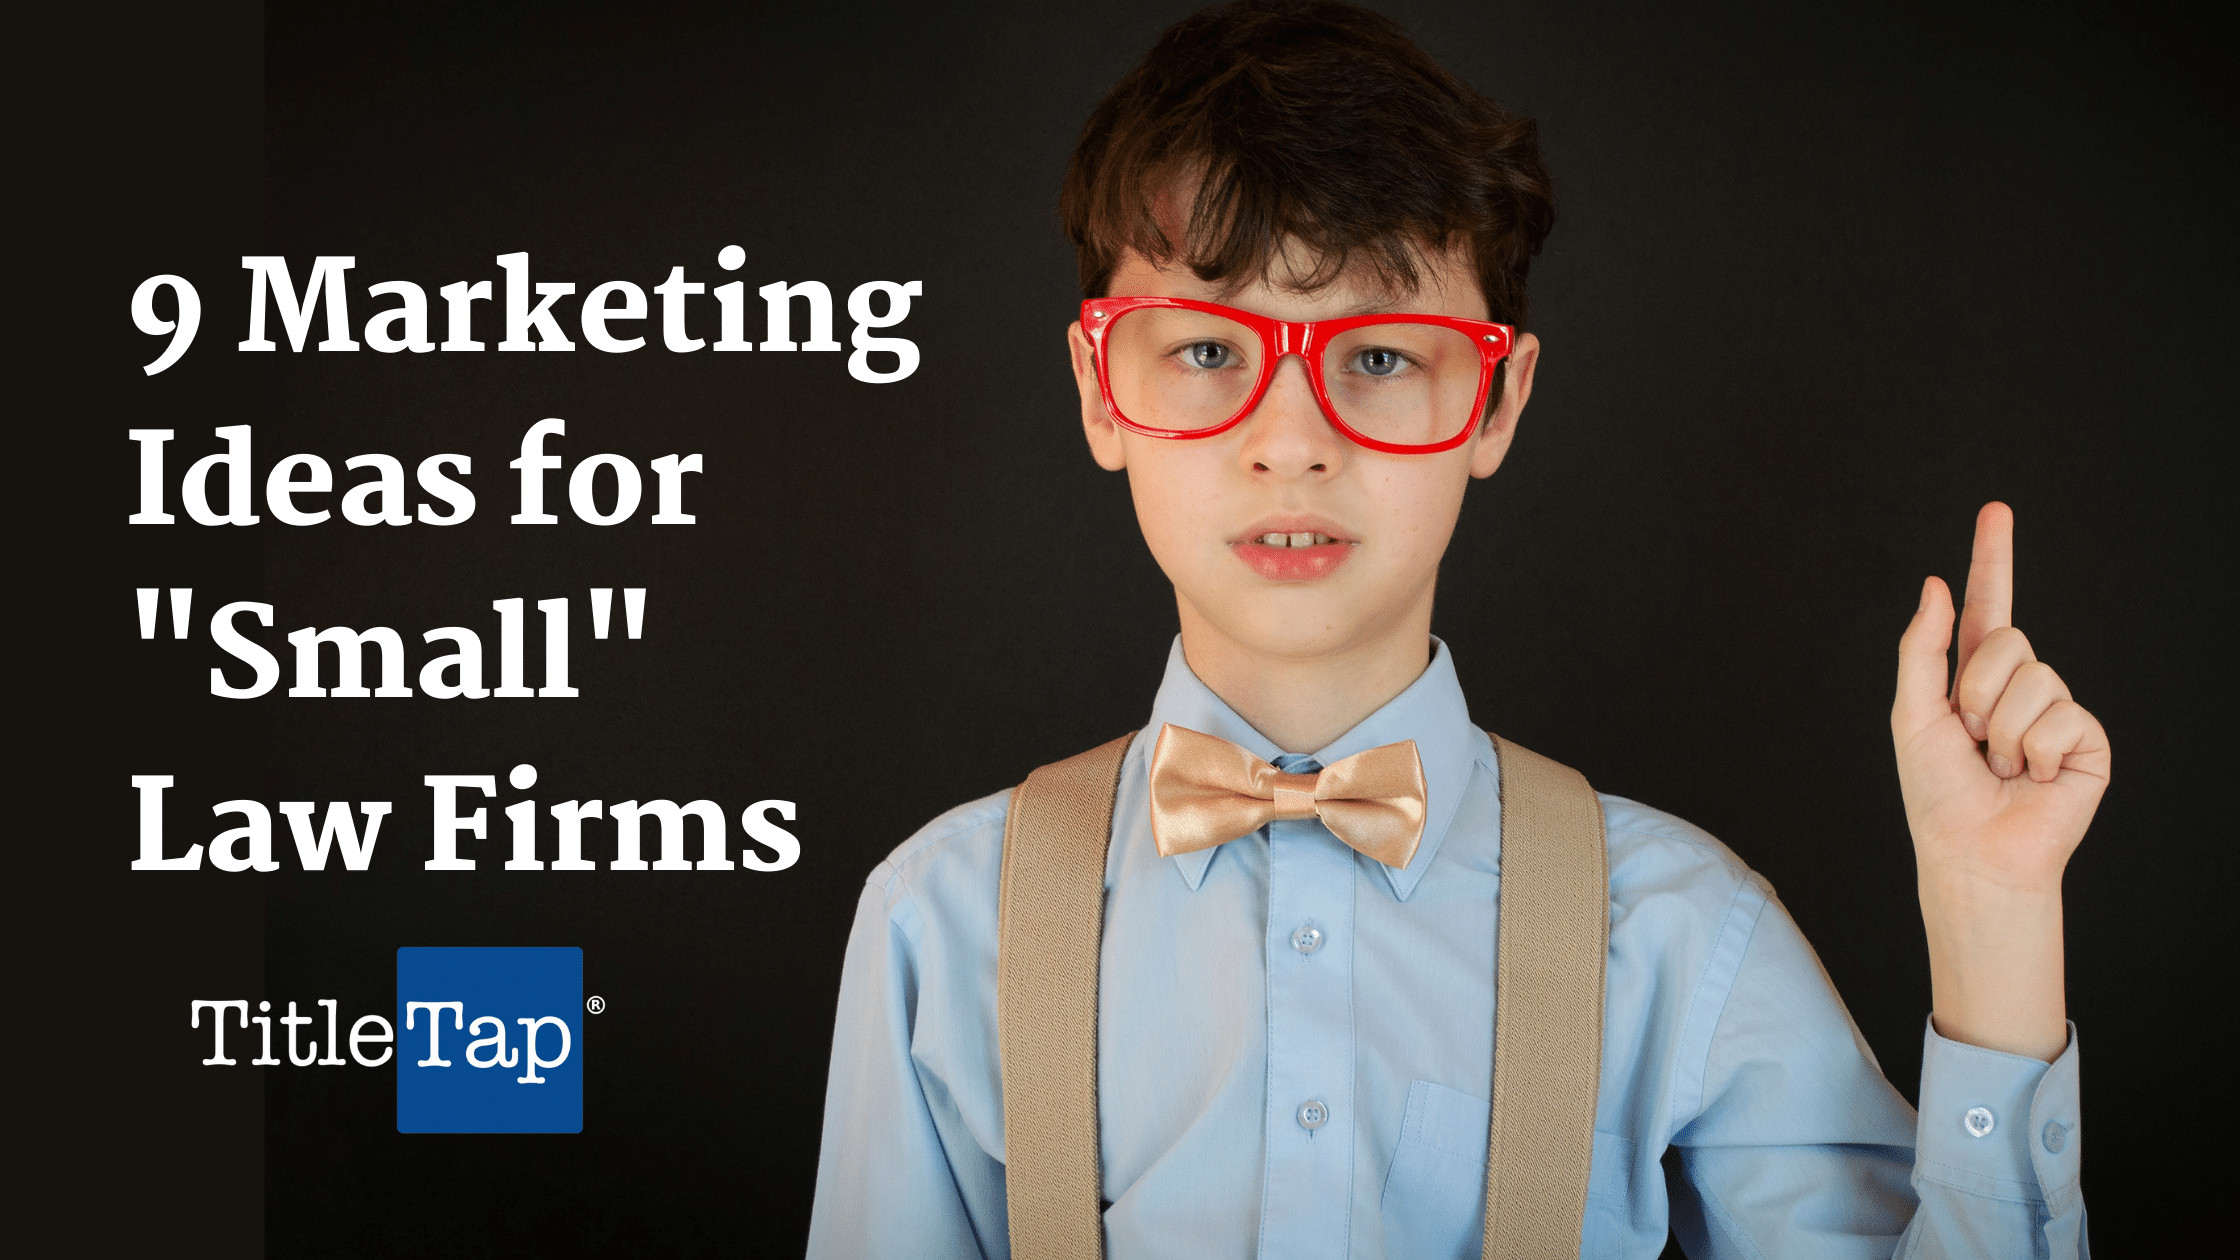 9 Marketing Ideas Small Law Firms